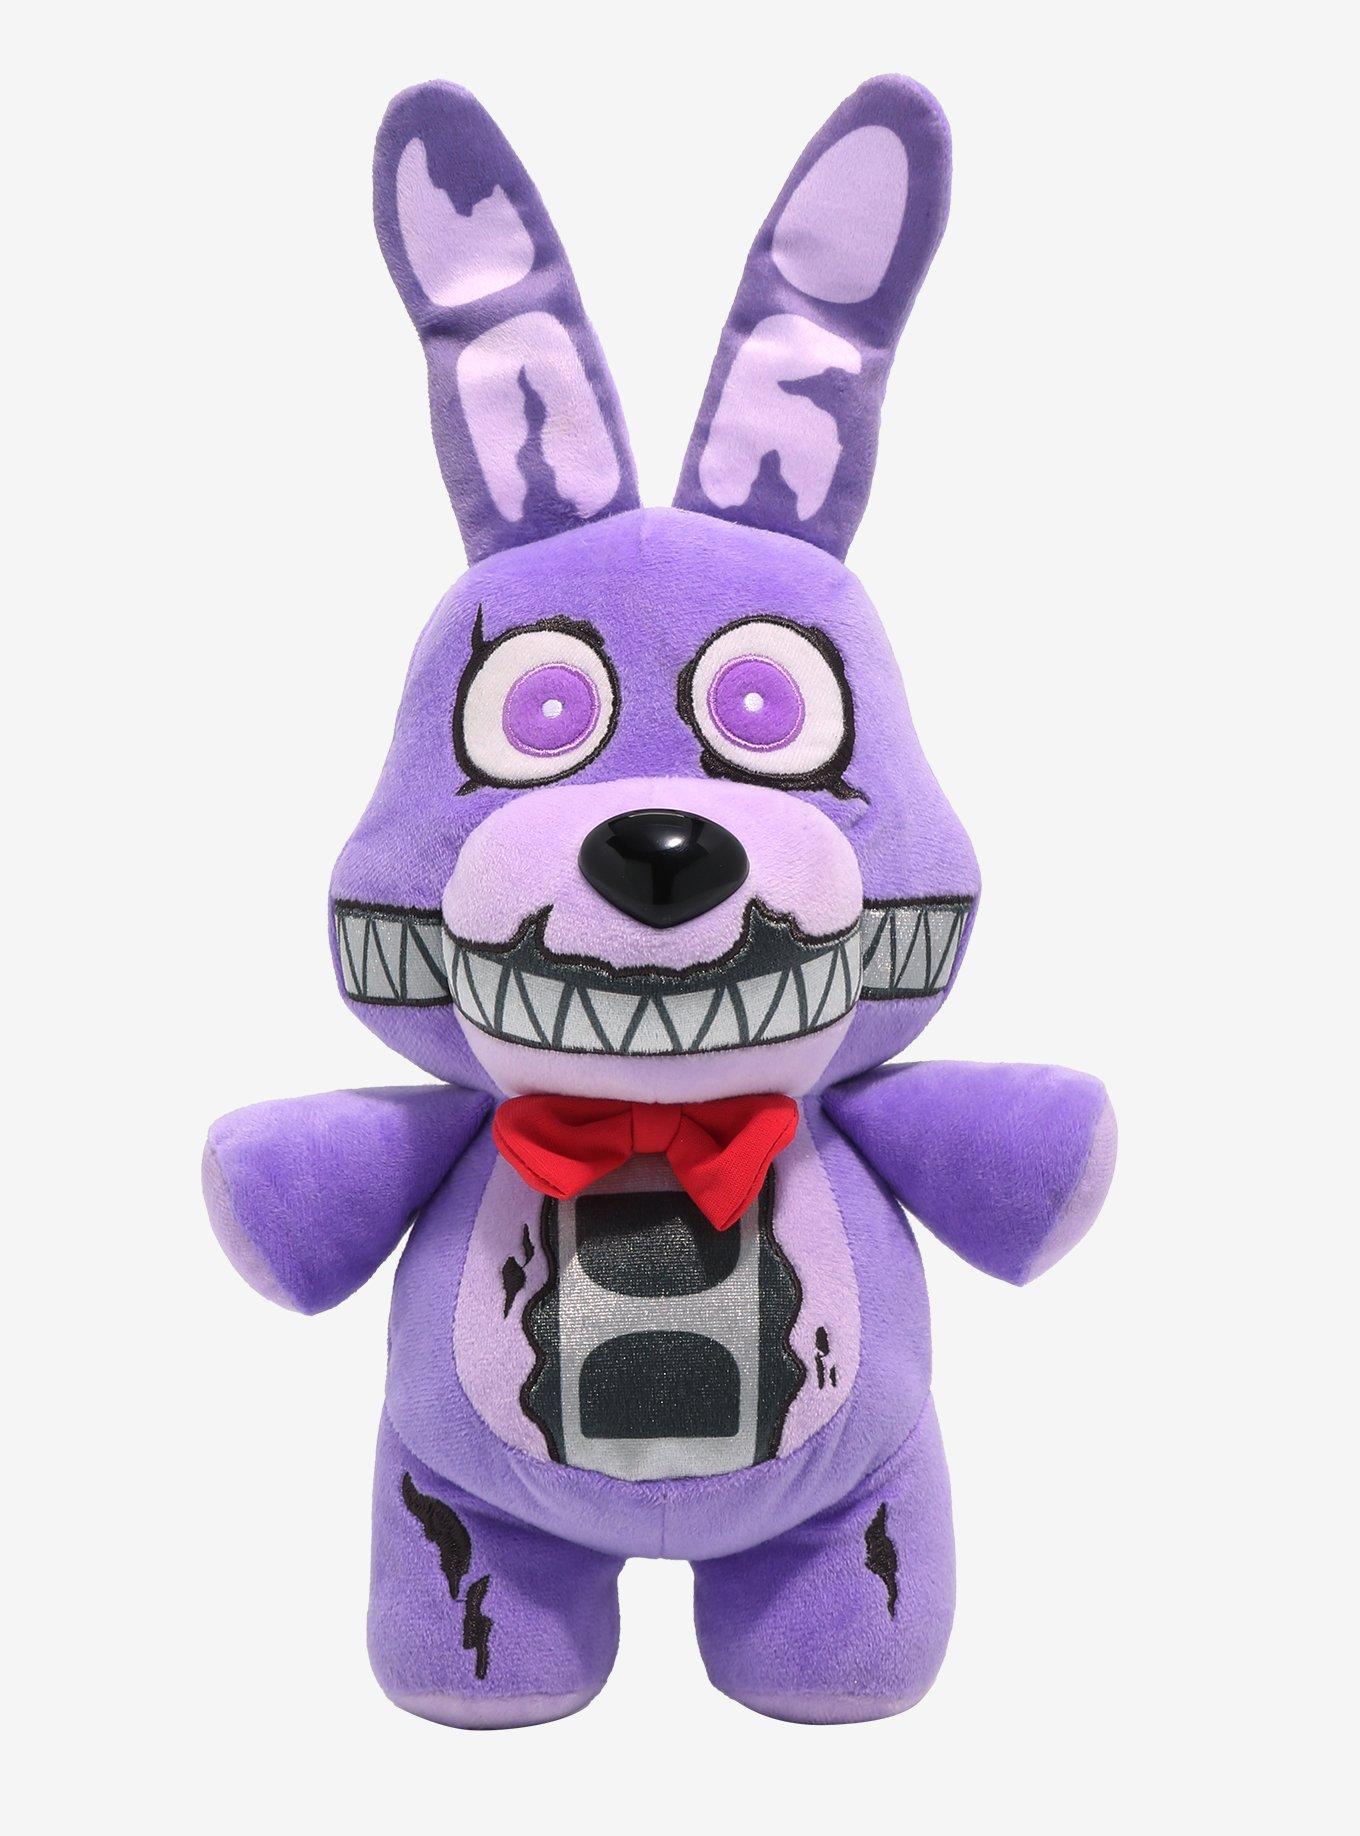  Funko Snaps!: Five Nights at Freddy's - Nightmare Bonnie : Toys  & Games